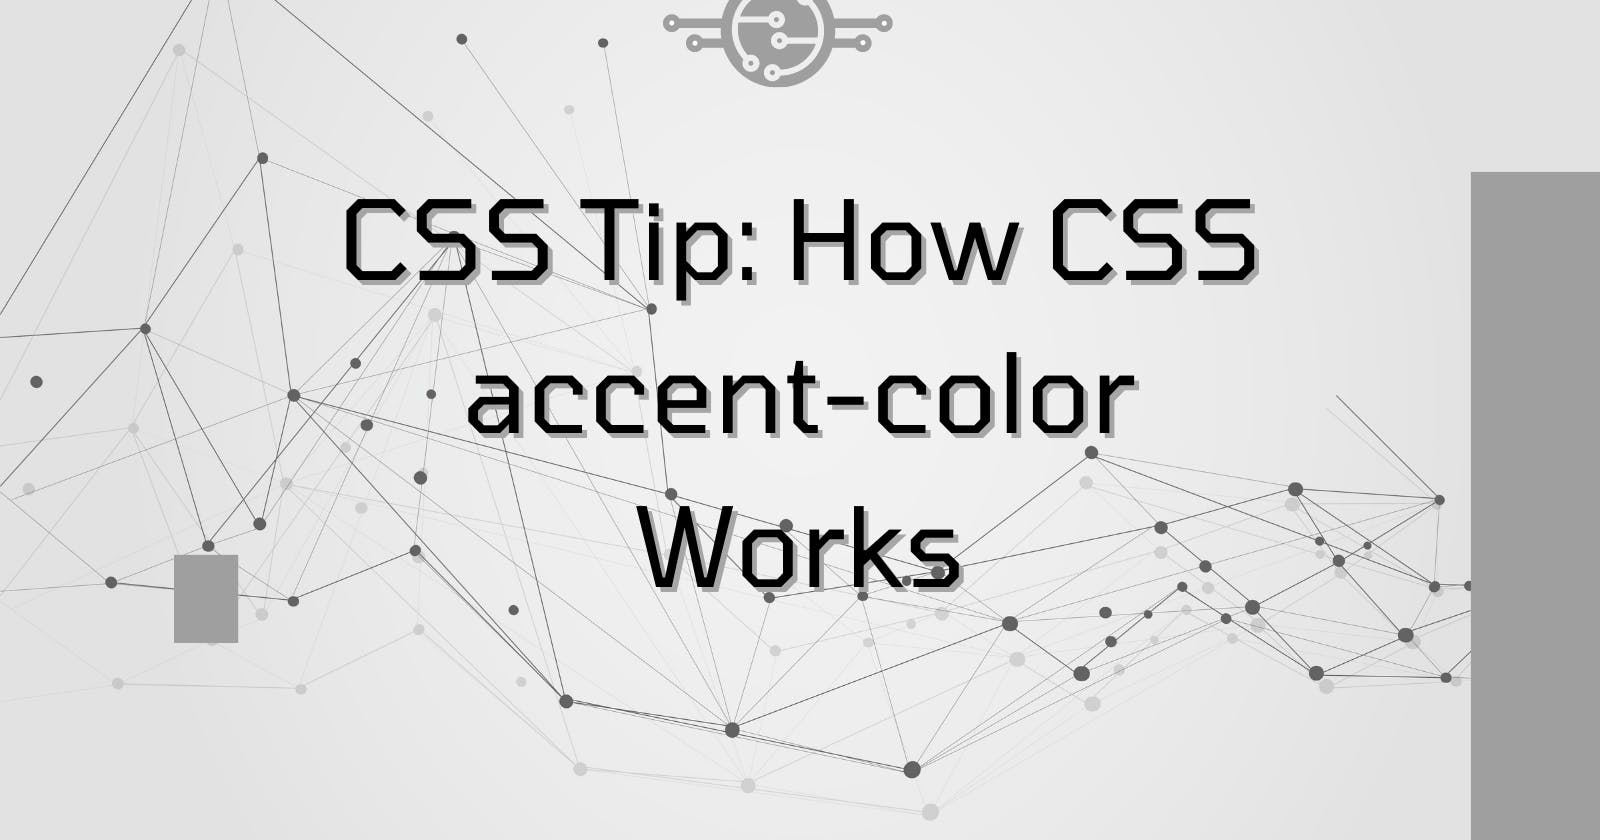 CSS Tip: How CSS accent-color Works